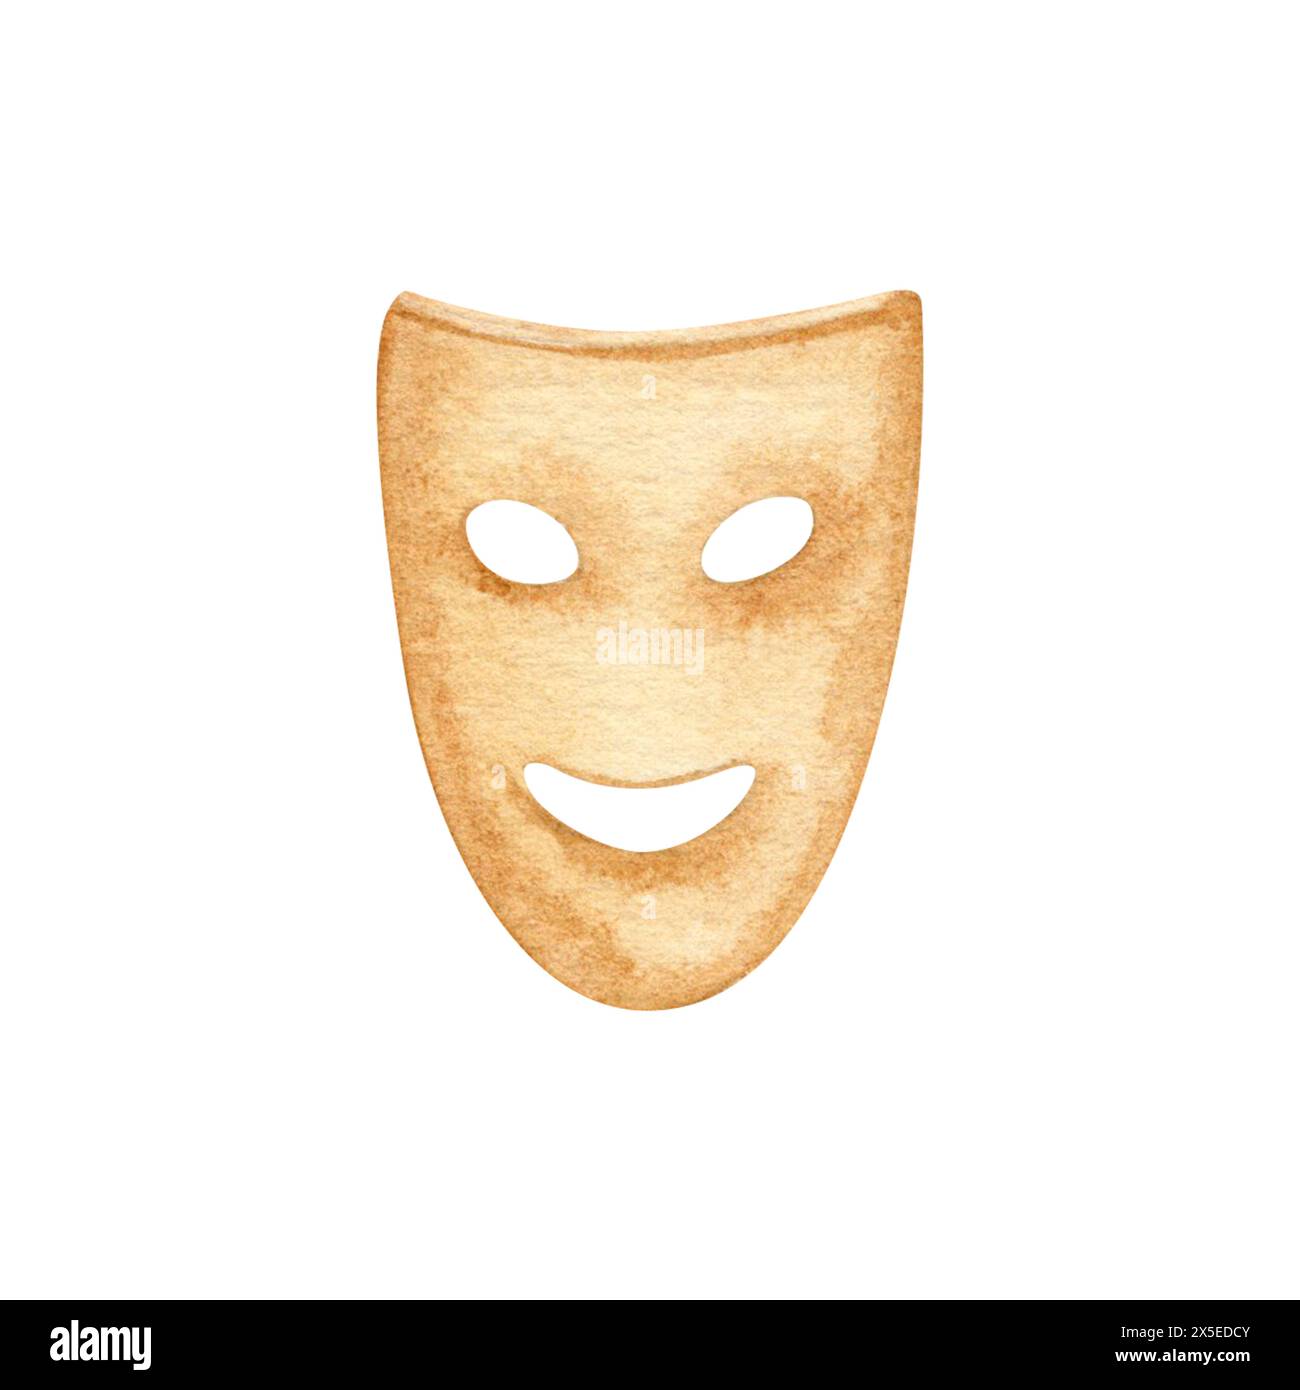 Theatrical actors comedy masks. Happy smile expression. Hand drawn watercolor illustration isolated on white background. Vintage carnival logo ticket Stock Photo